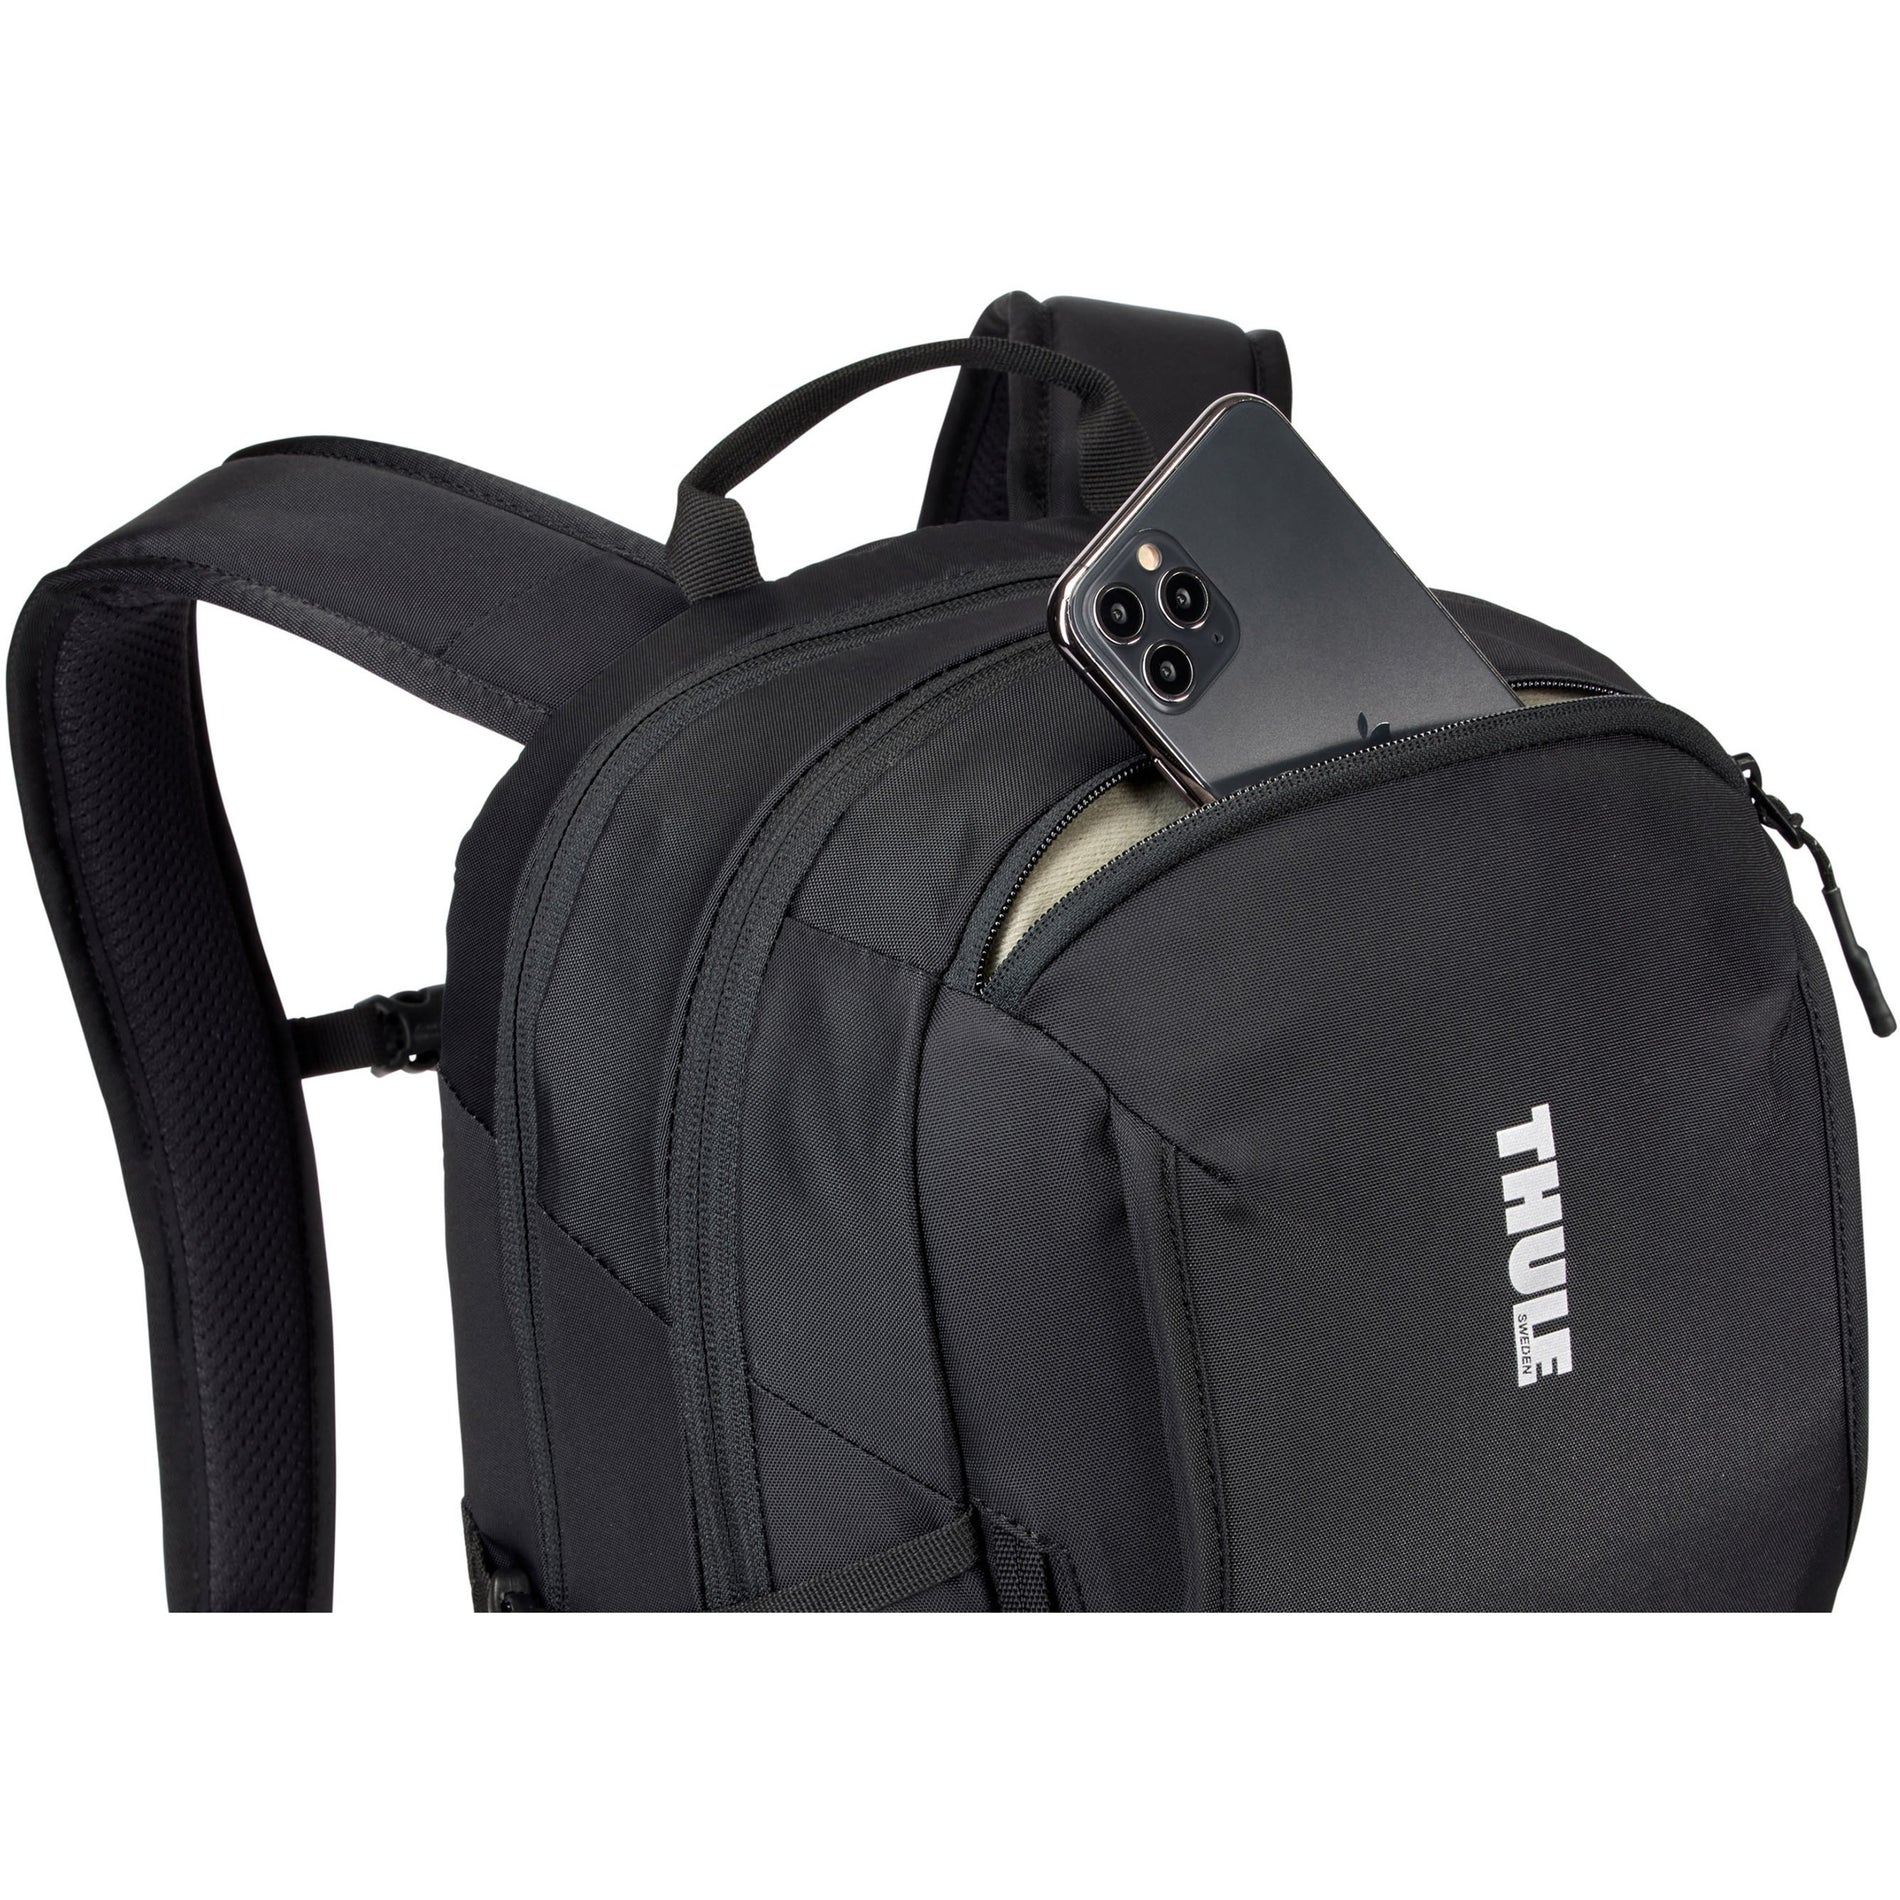 Thule 3204841 Enroute Backpack 23l Black, Carrying Case for Notebook, Tablet, Smartphone